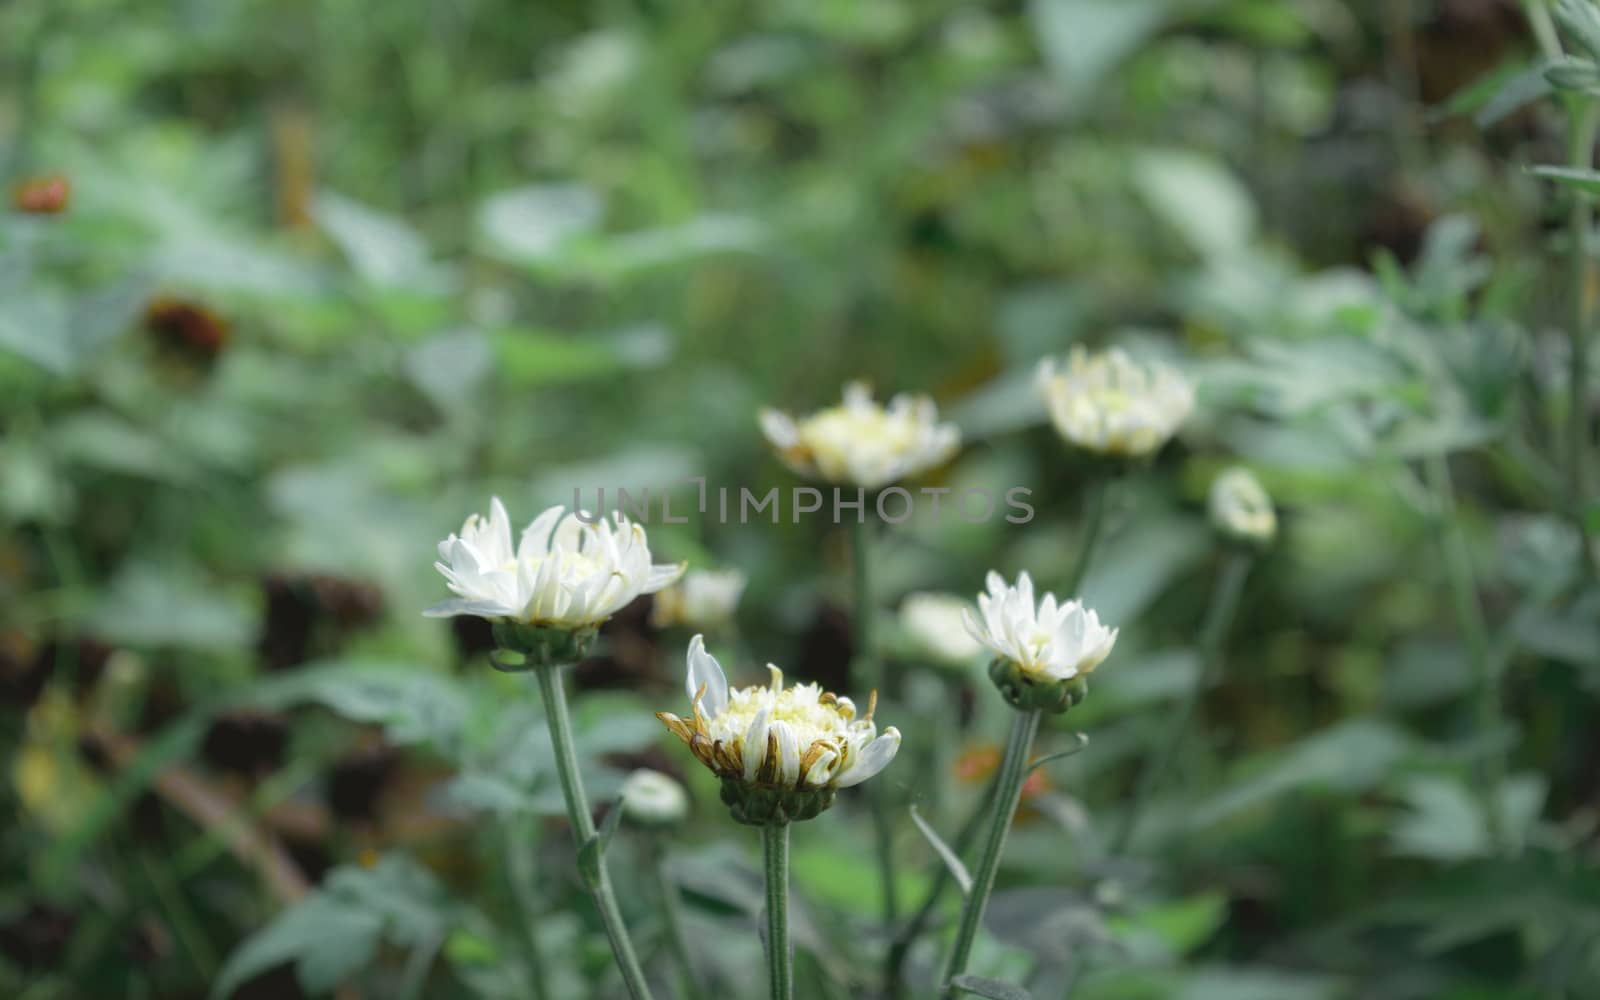 Closeup beautiful small cute flower of yellow pollen and white petal of Common Daisy, Lawn Daisy, Bellis Perennis, Woundwort, Bruisewort or English Daisy variegated foliage spot in rural environment. Shibpur Howrah botanical garden West Bengal India South Asia Pacific.